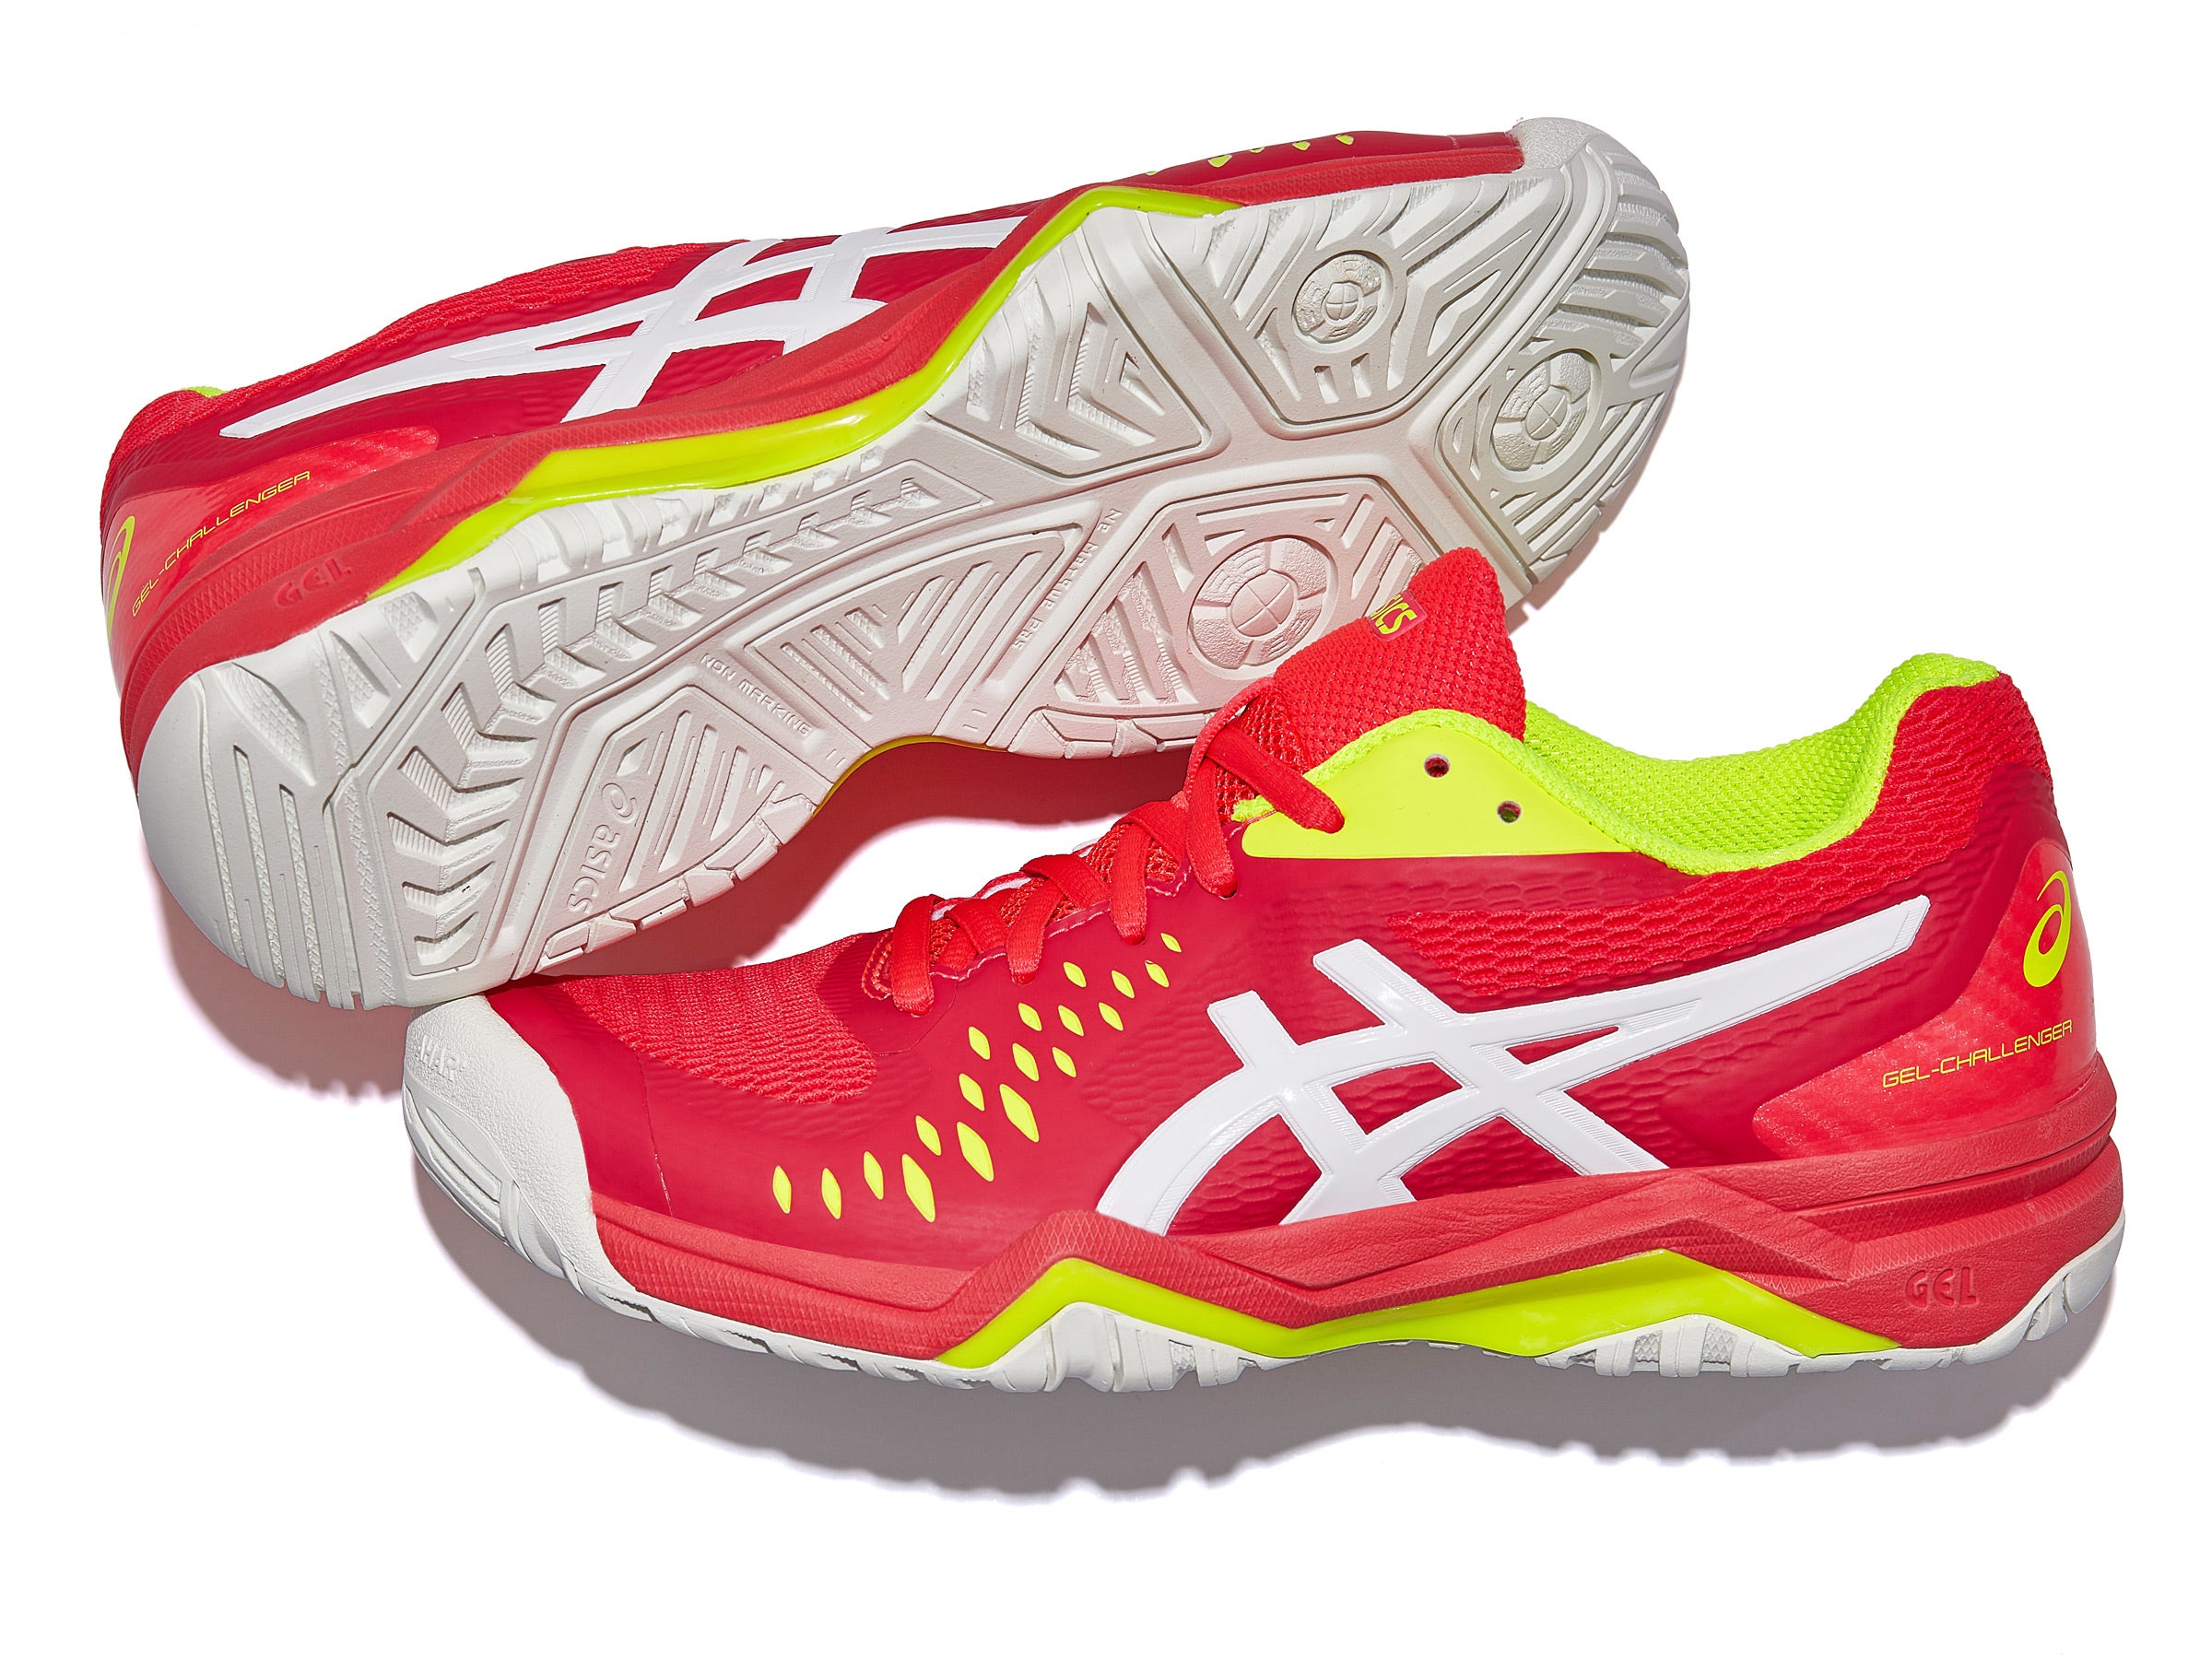 bloquear sí mismo Cabina Asics Tennis Shoes Review Flash Sales, SAVE 51%.